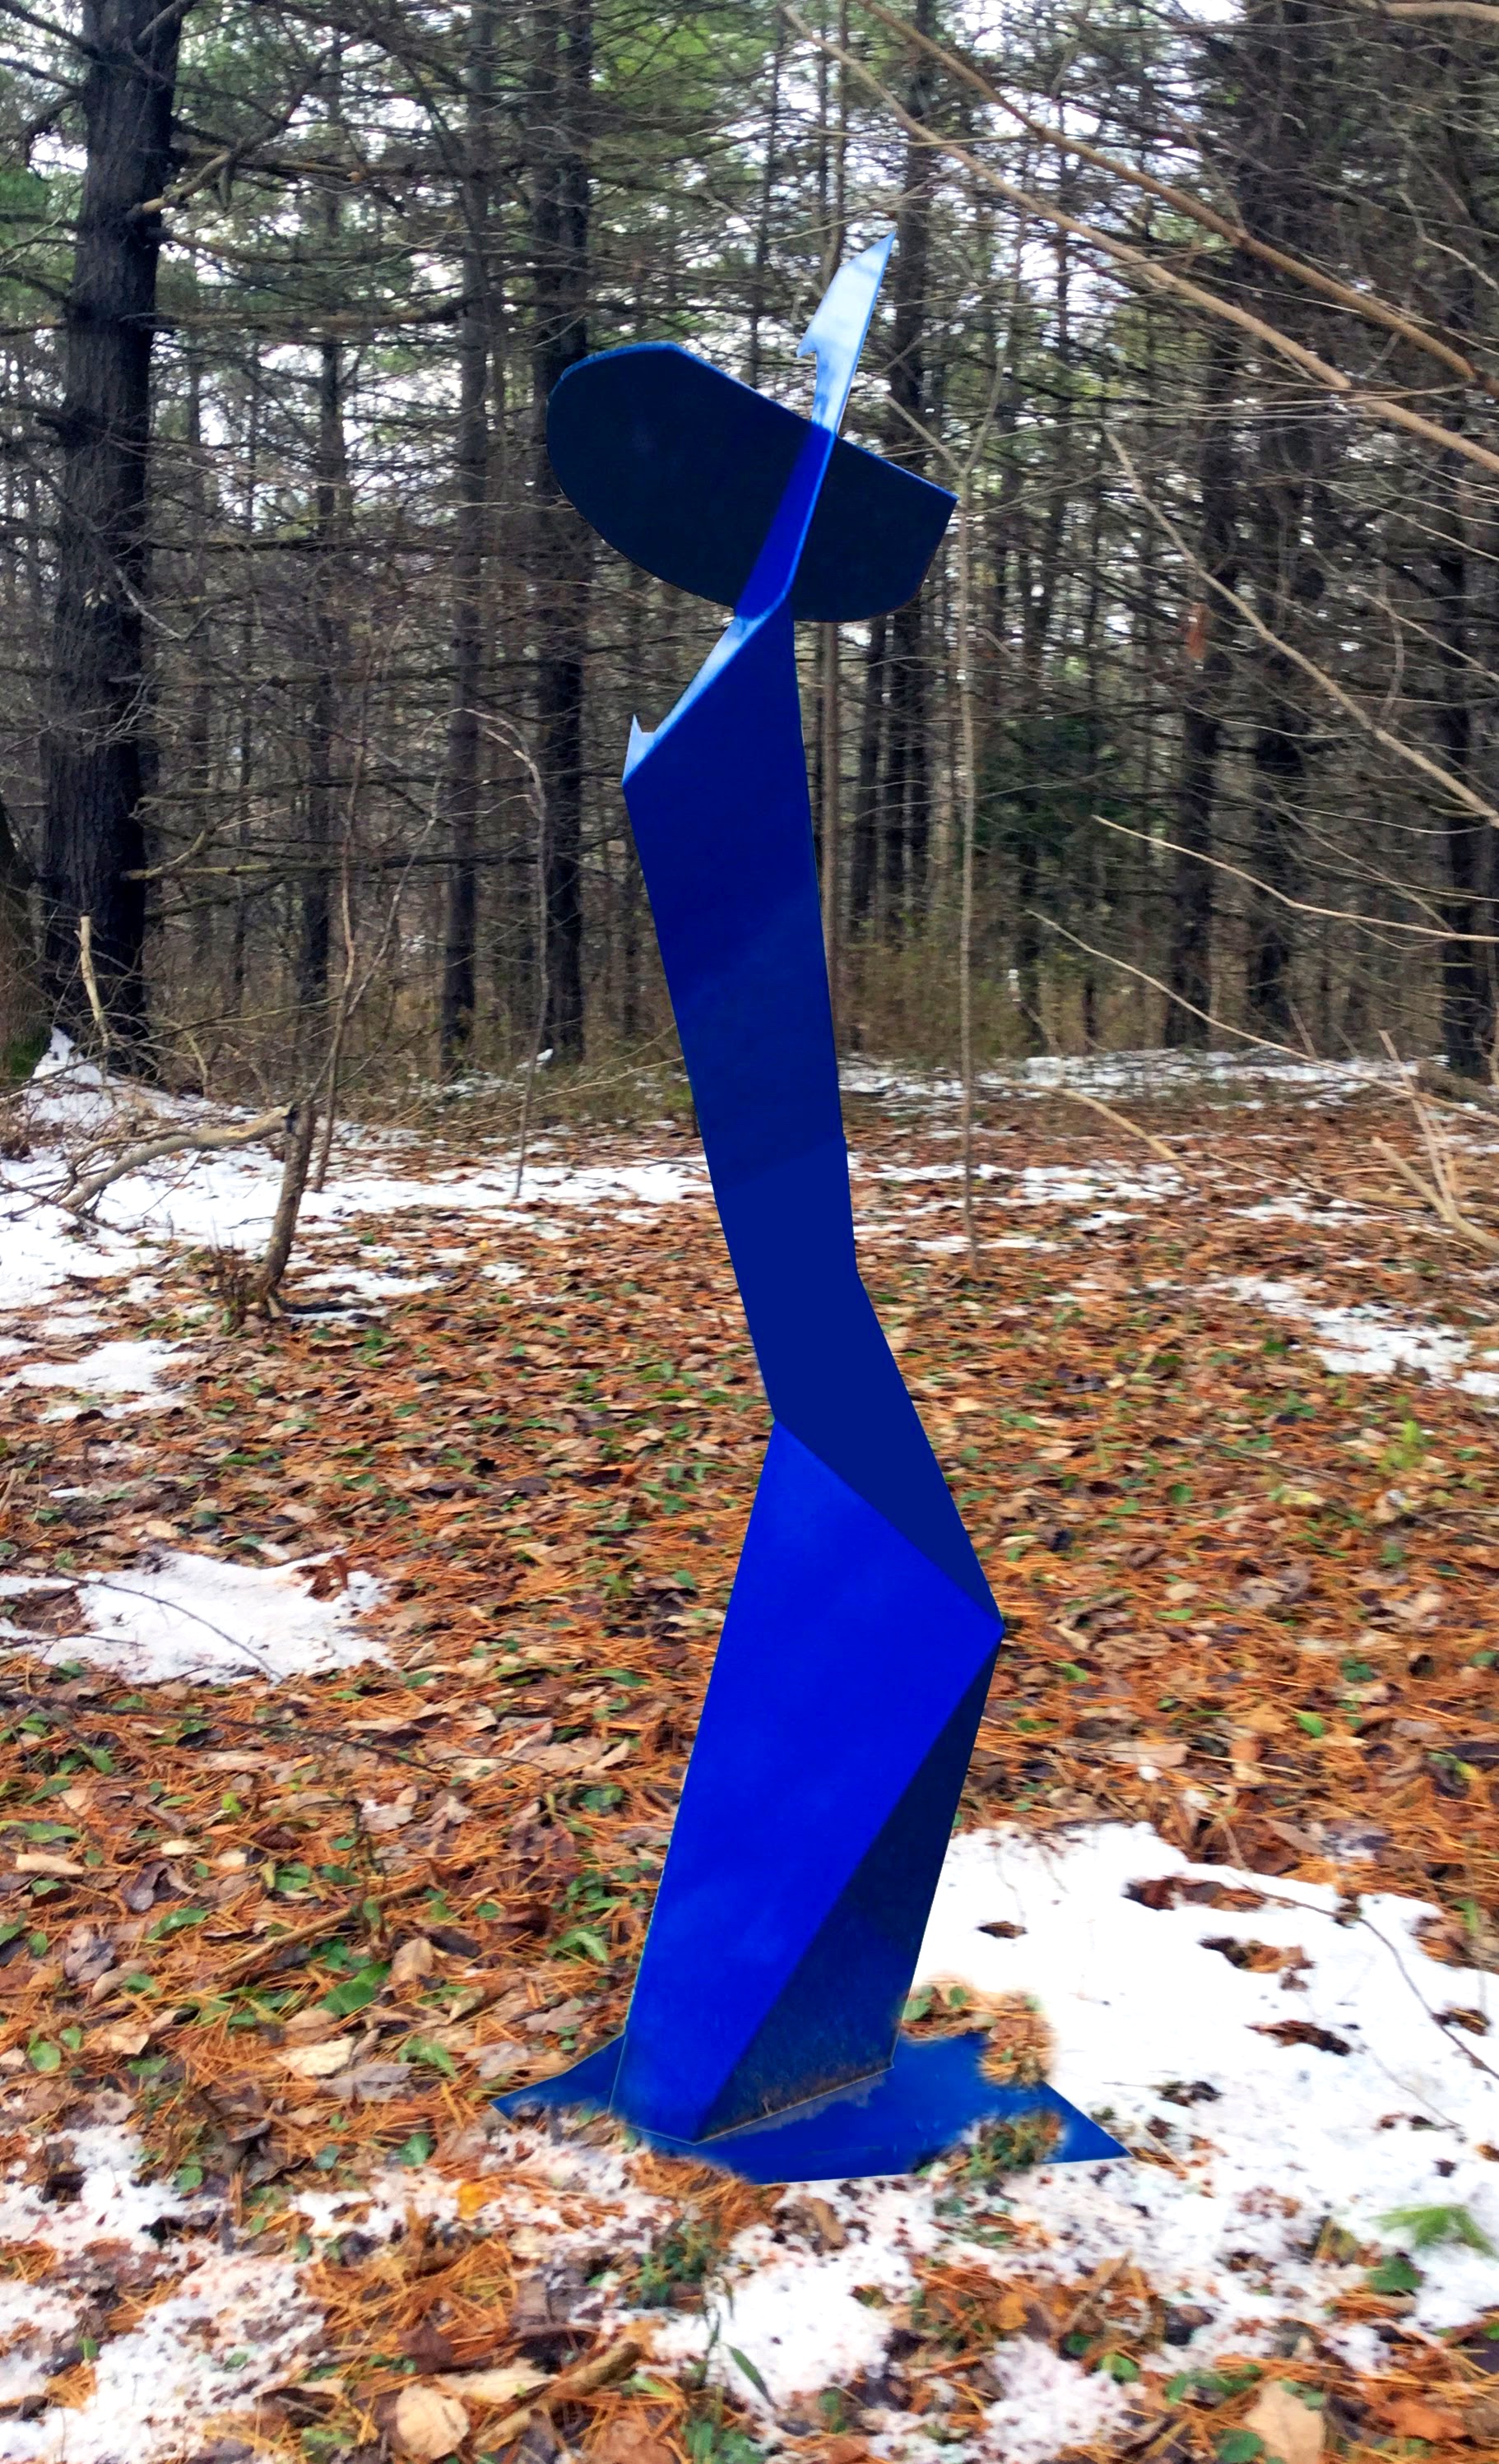 Pure Form #8, painted welded steel, 85 x 30 x 24 in, $15,000